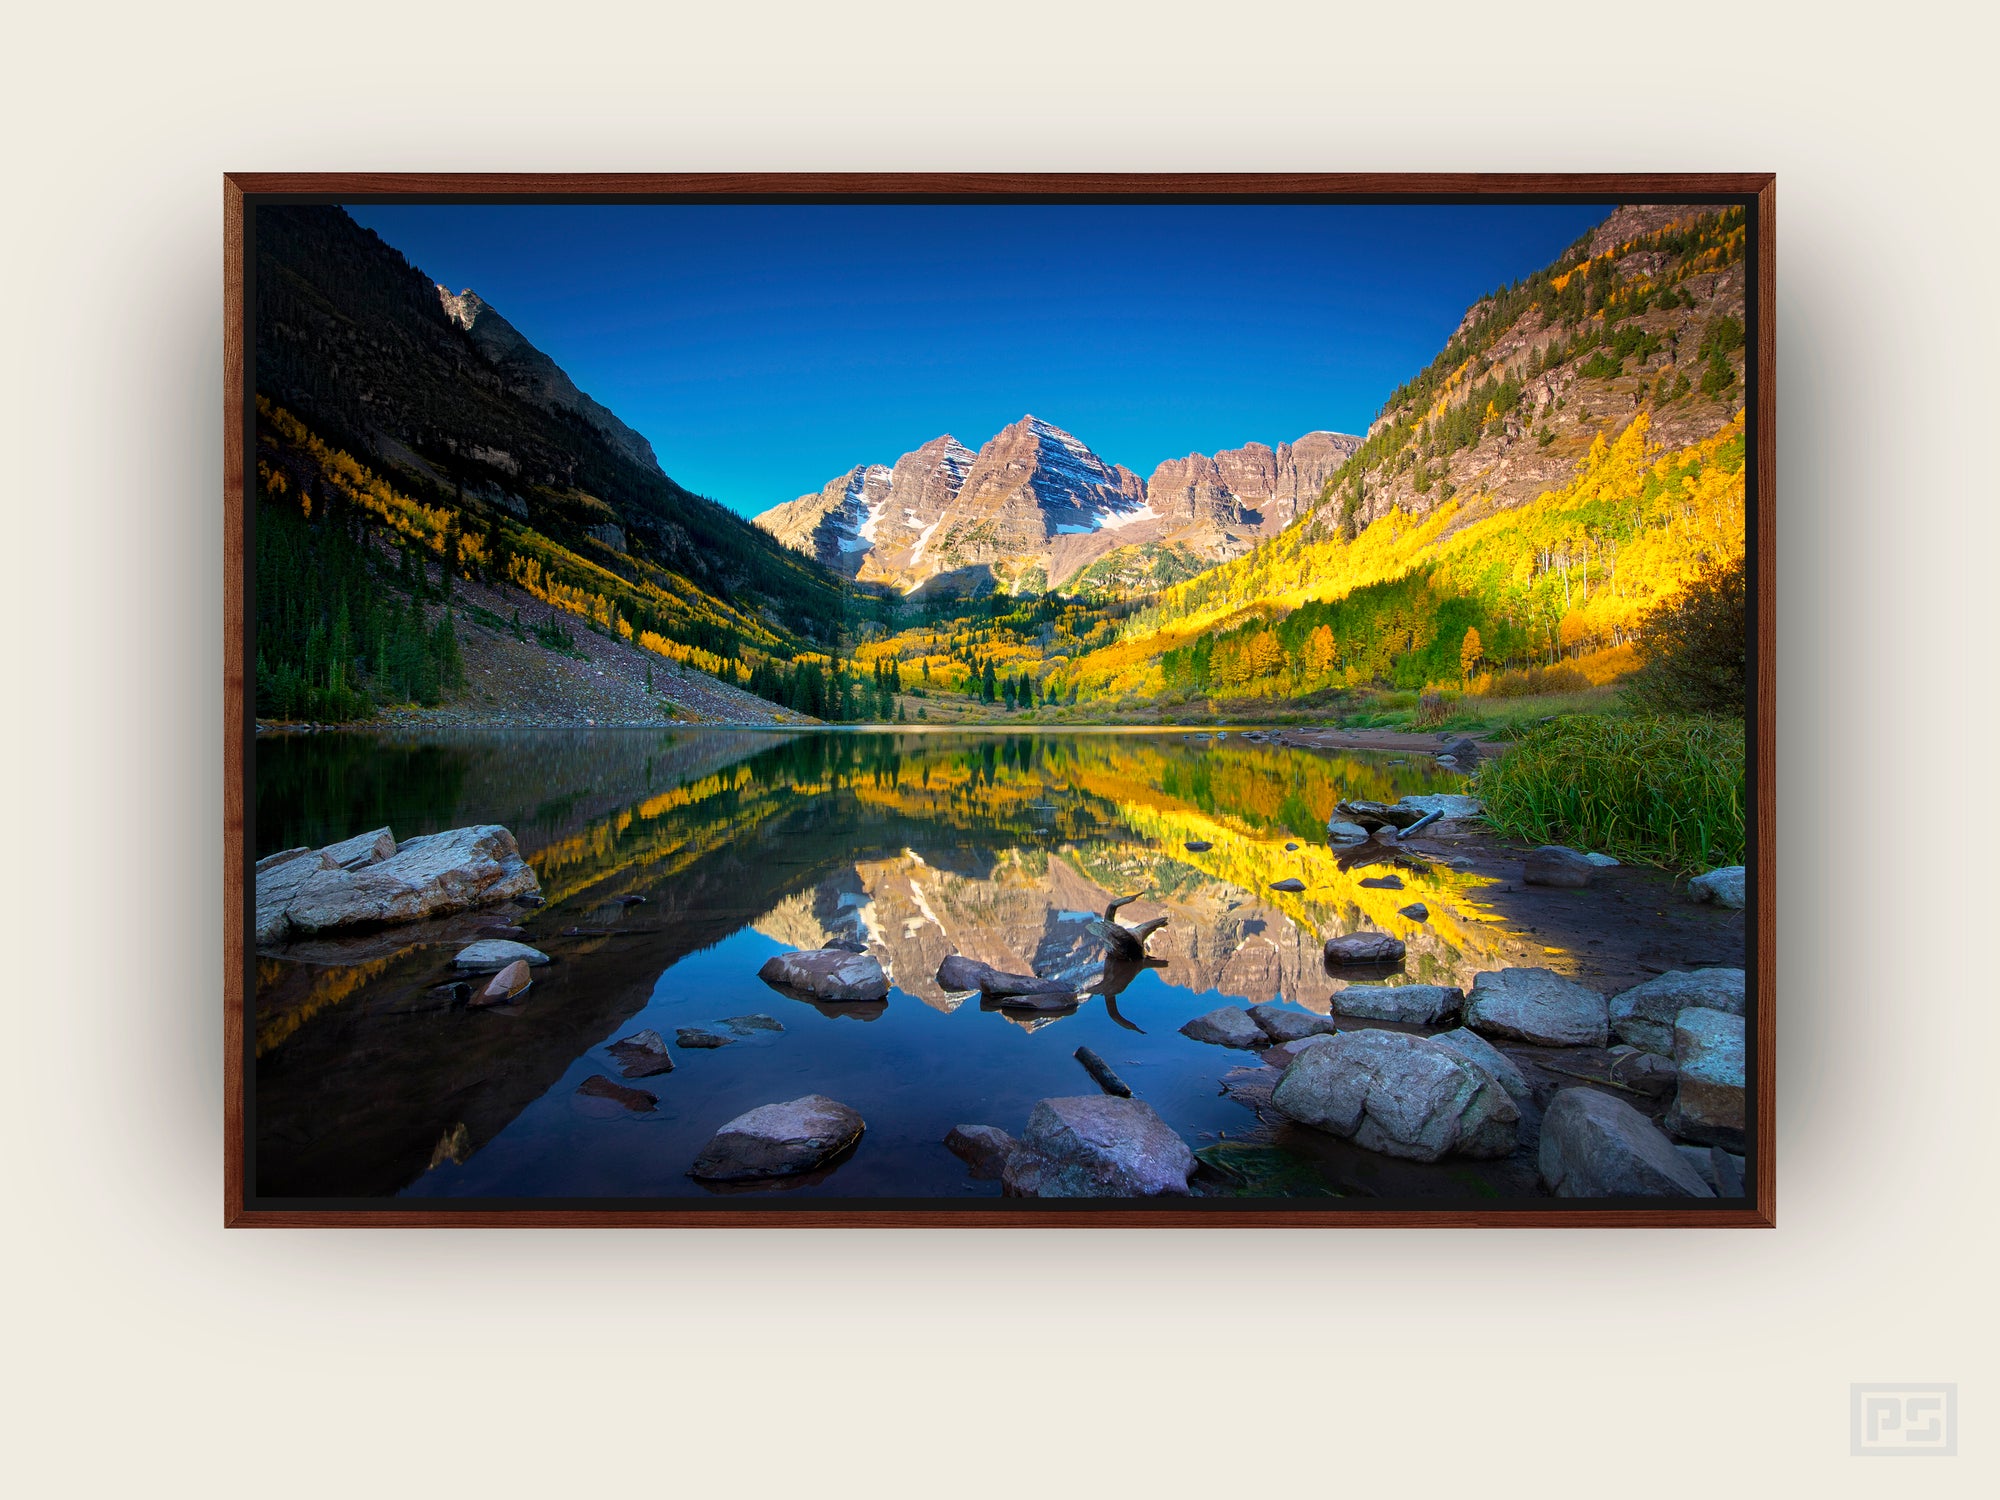 Framed Canvas Print "The Maroon Bells"